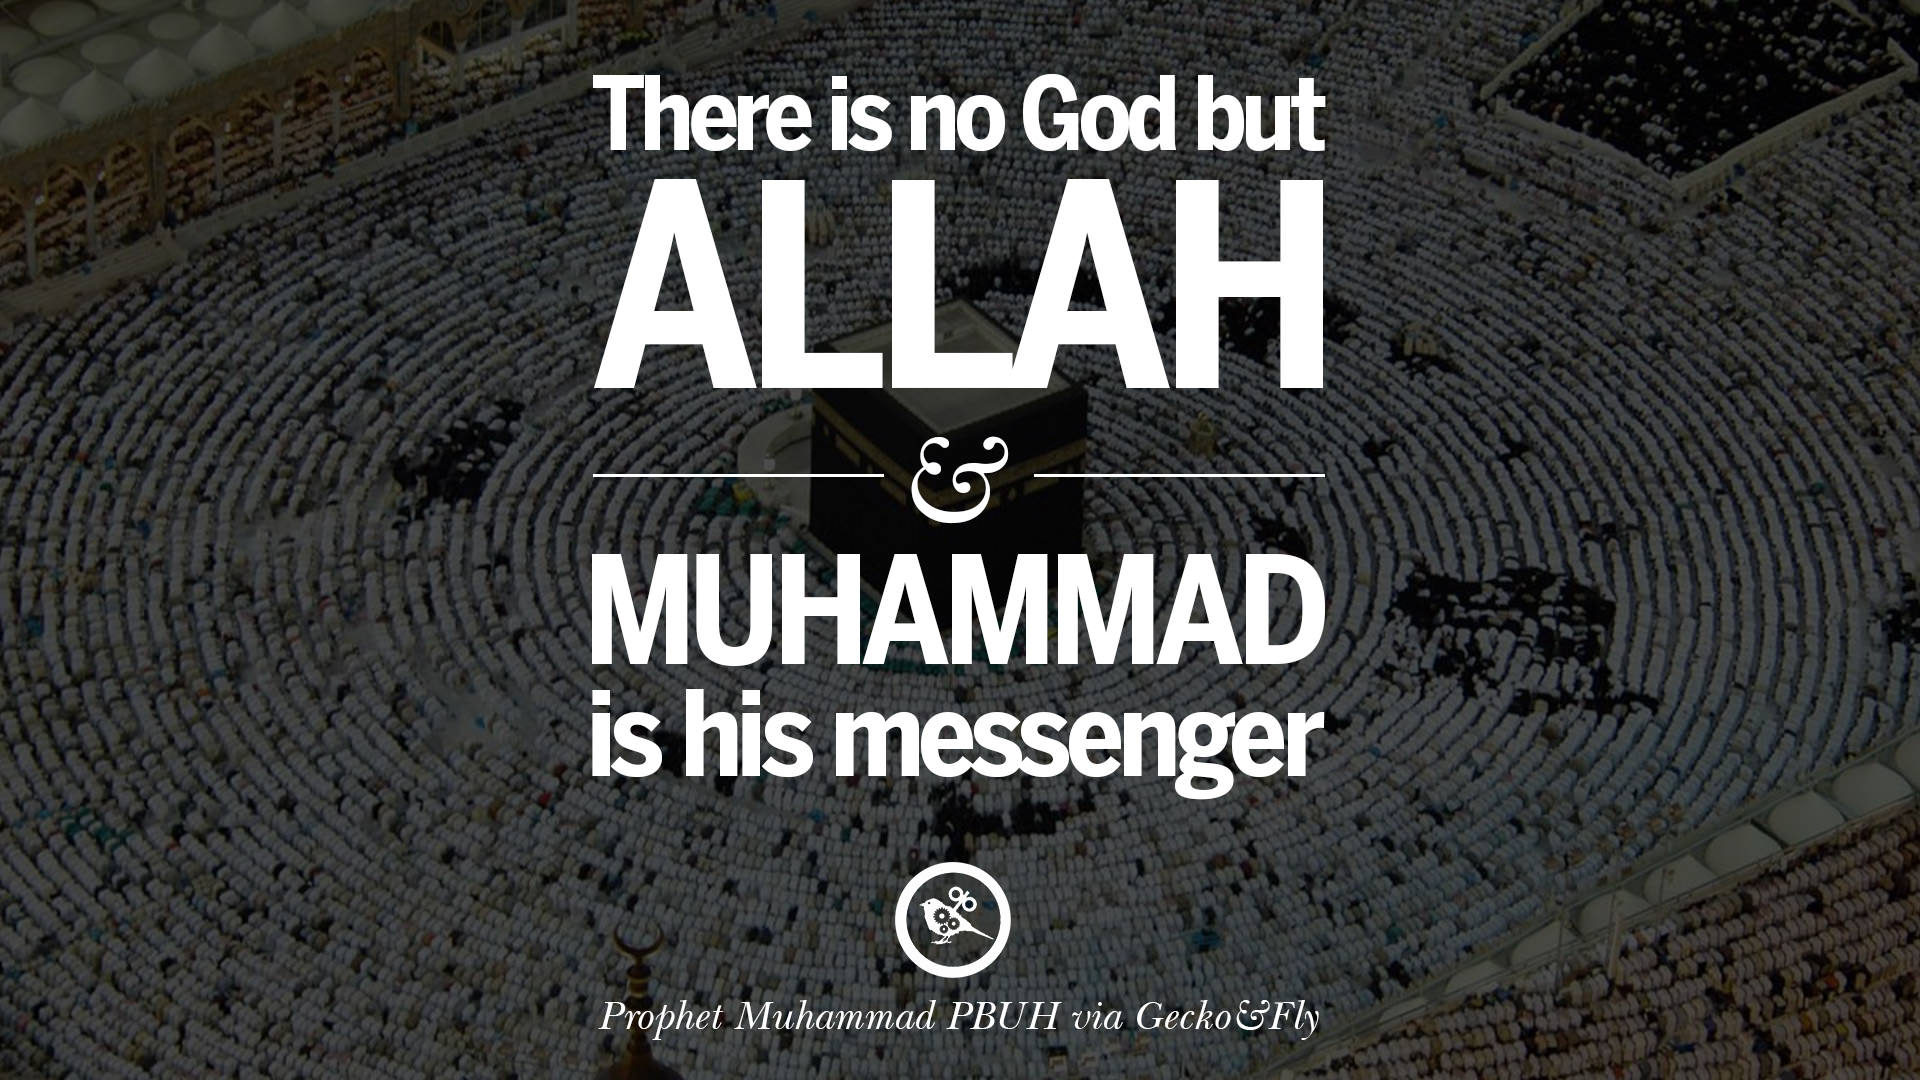 10 Beautiful Prophet Muhammad Quotes on Love God passion and Faith